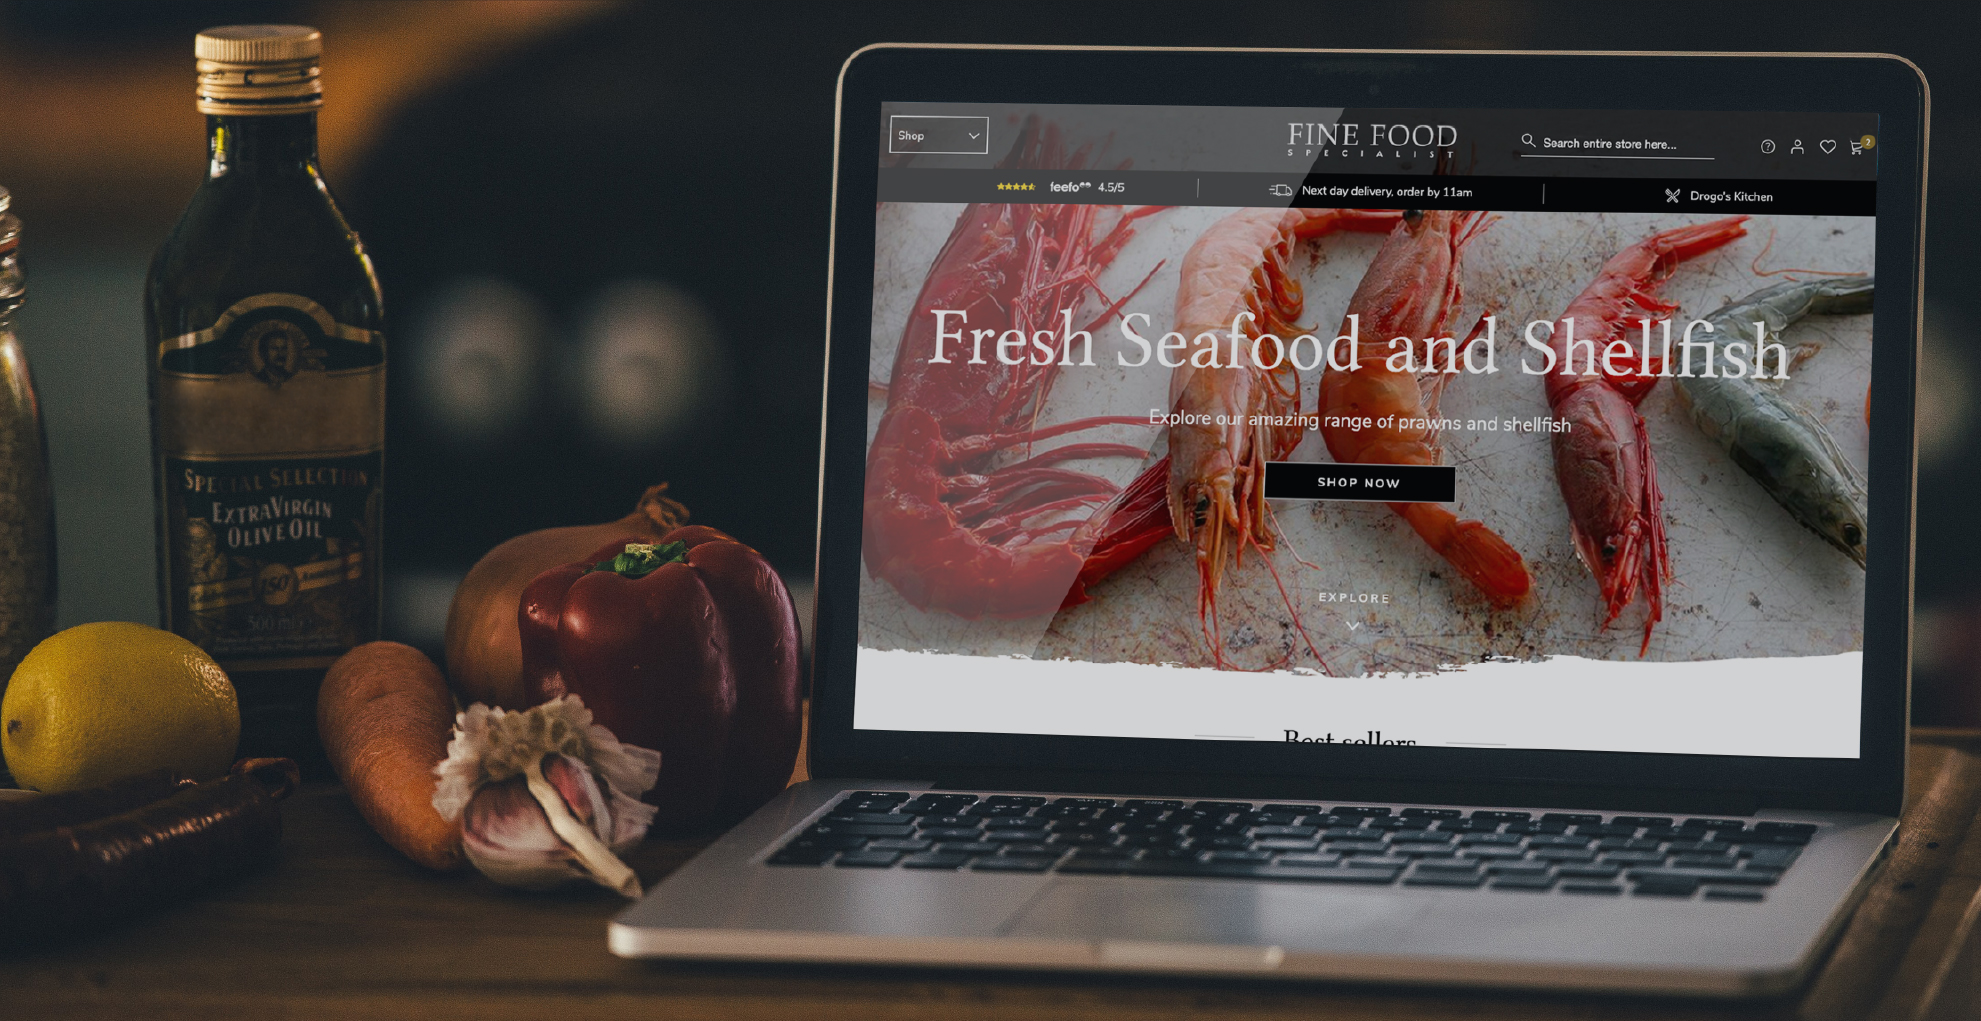 New Fine Food Specialist on a laptop